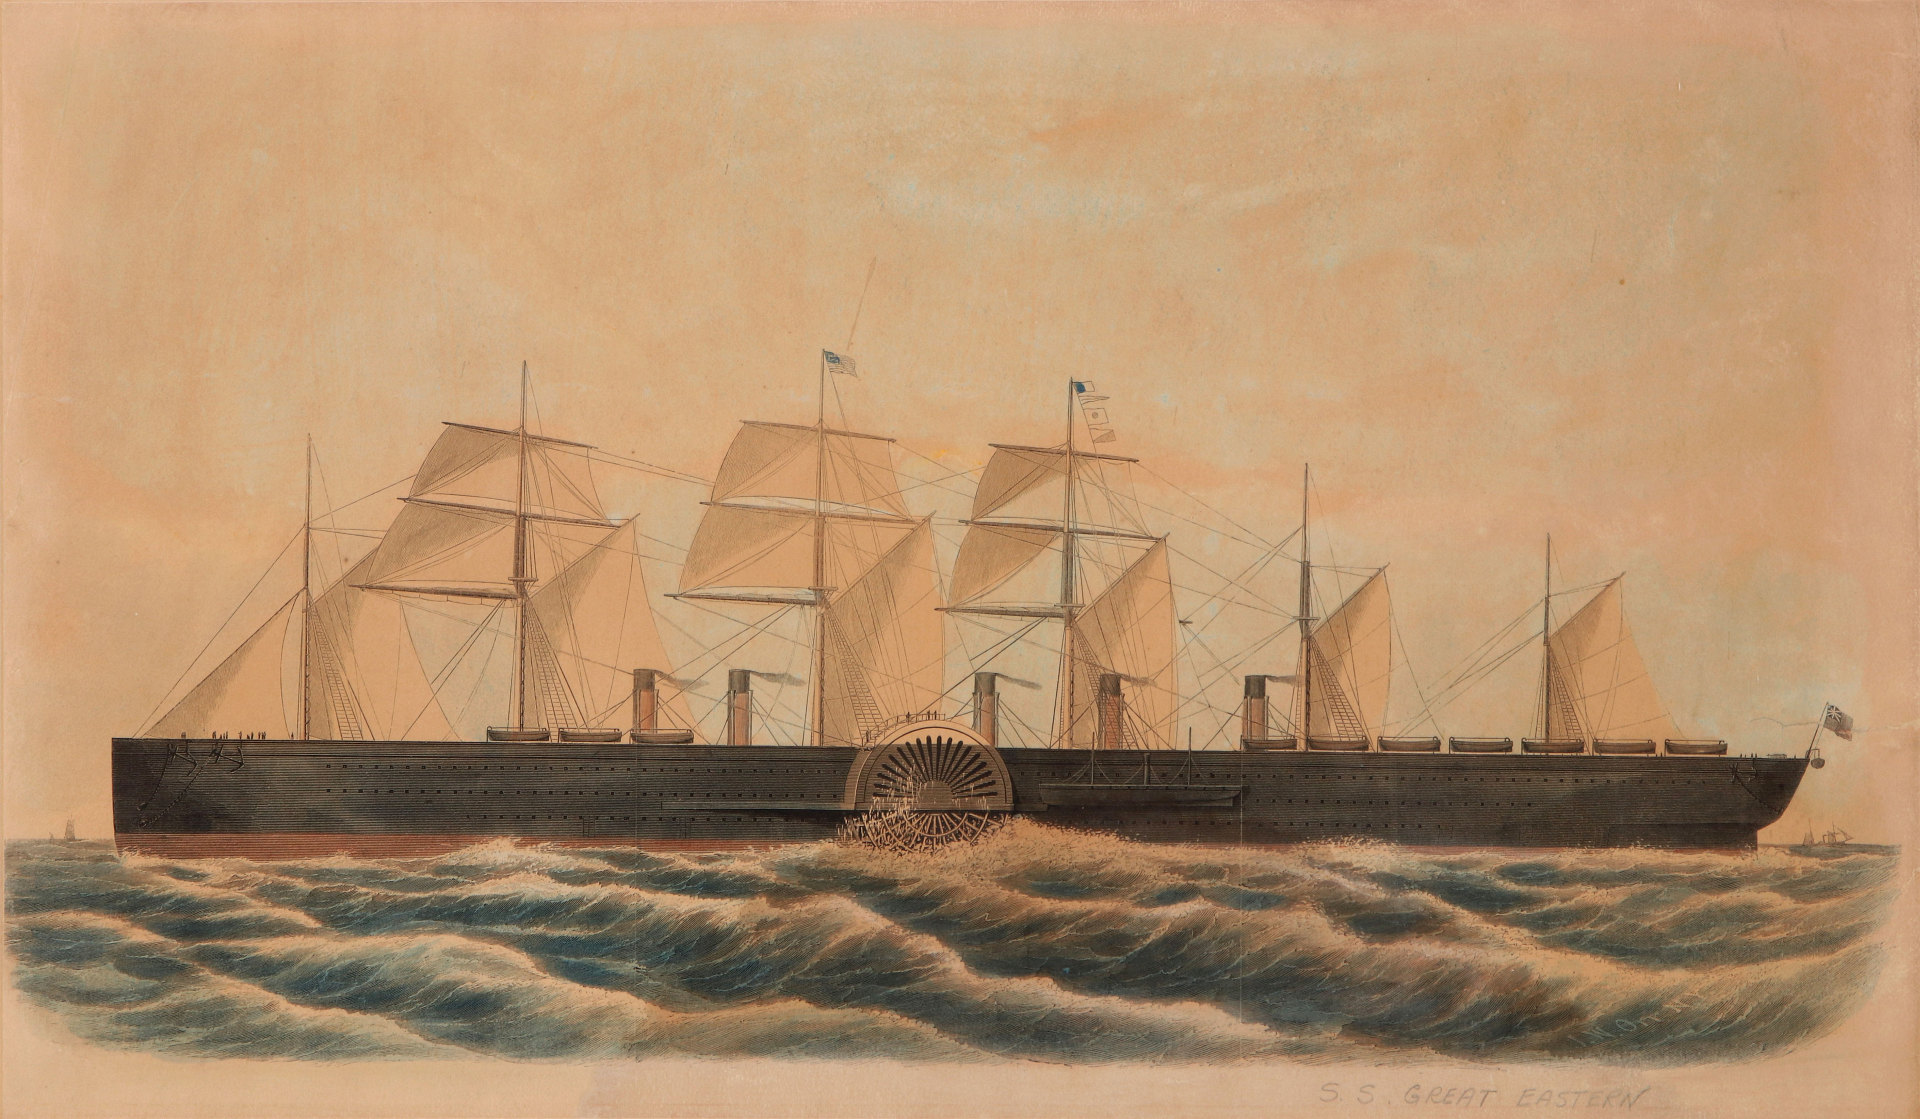 HAND COLORED WOOD ENGRAVING OF STEAMSHIP C. 1860